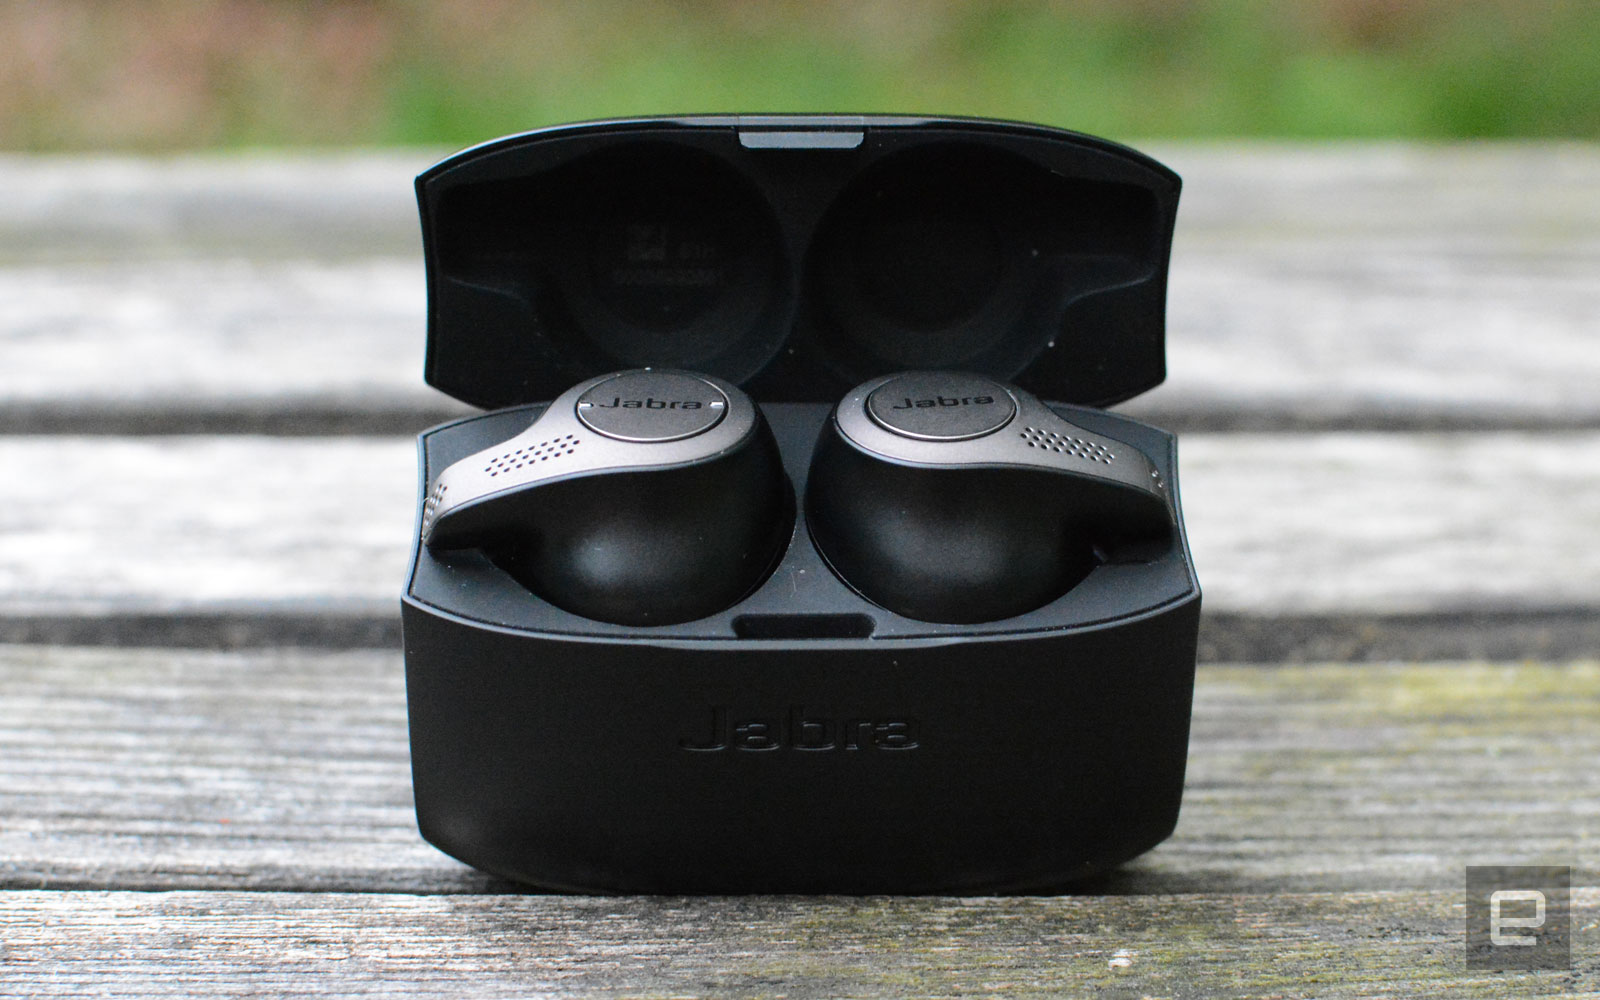 Jabra Elite 65t review: Put down your AirPods